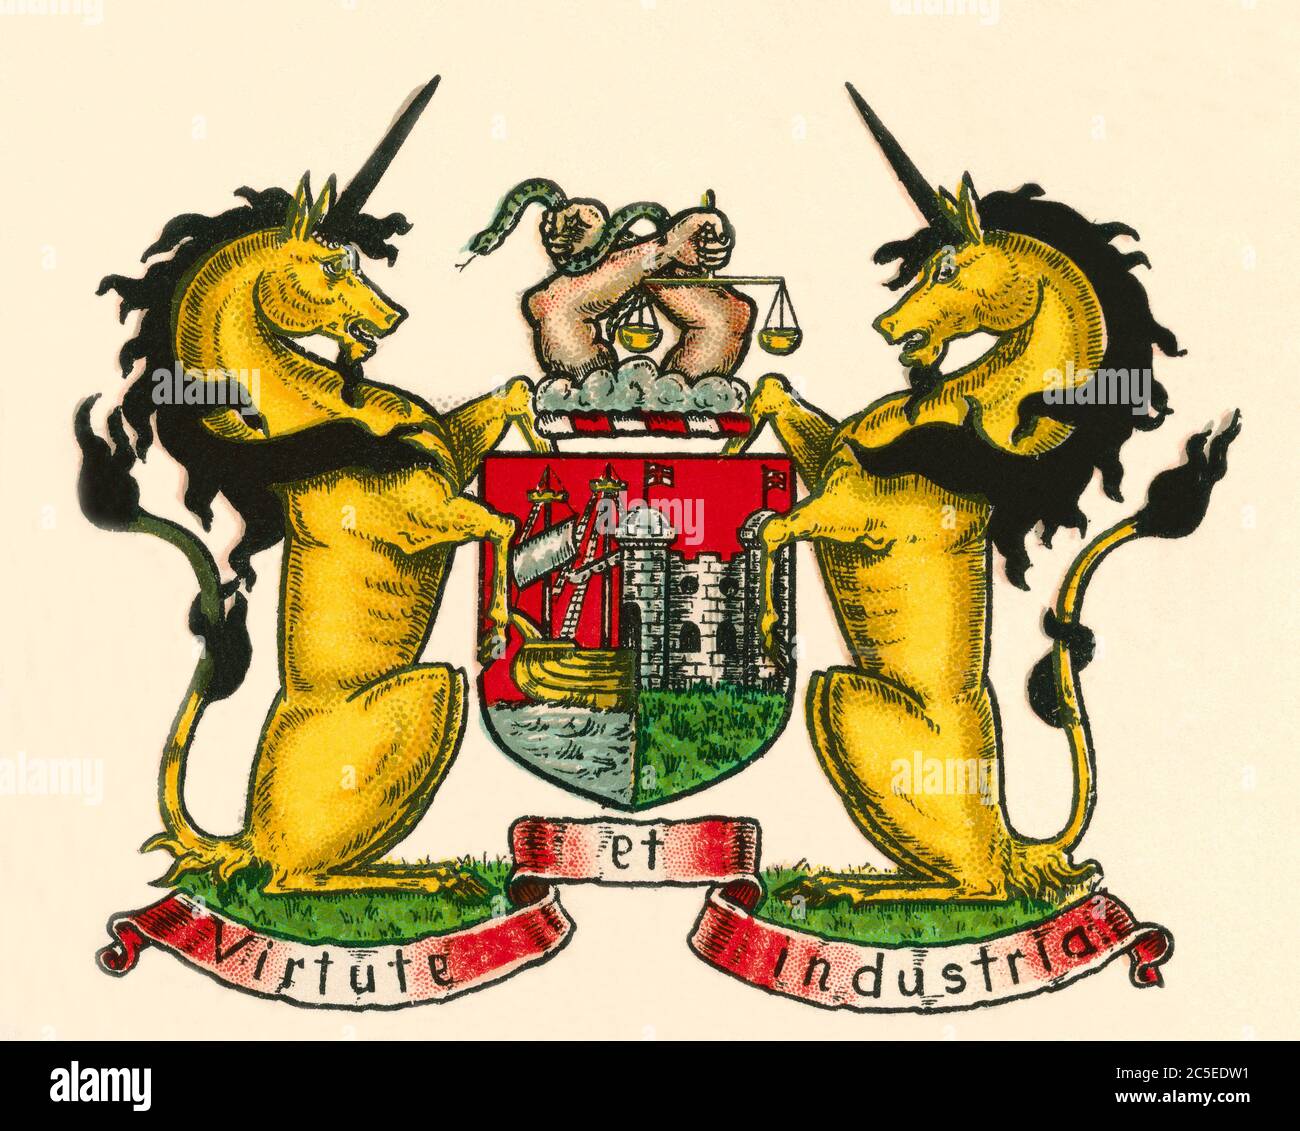 Coat of arms of Bristol, England.  From The Business Encyclopaedia and Legal Adviser, published 1907. Stock Photo